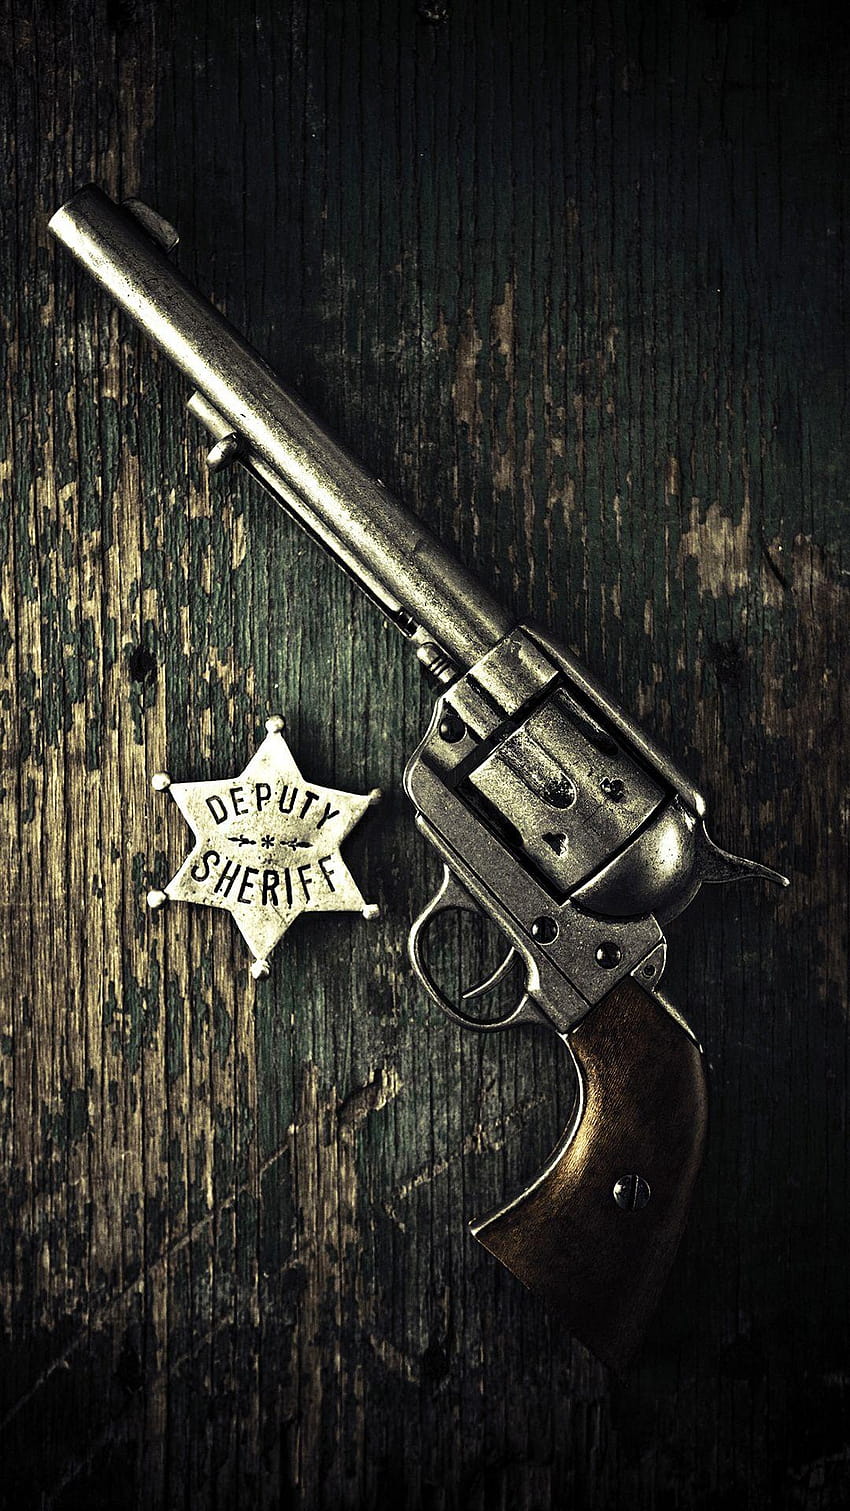 Sheriff Group with 39 items, glock iphone background HD phone wallpaper